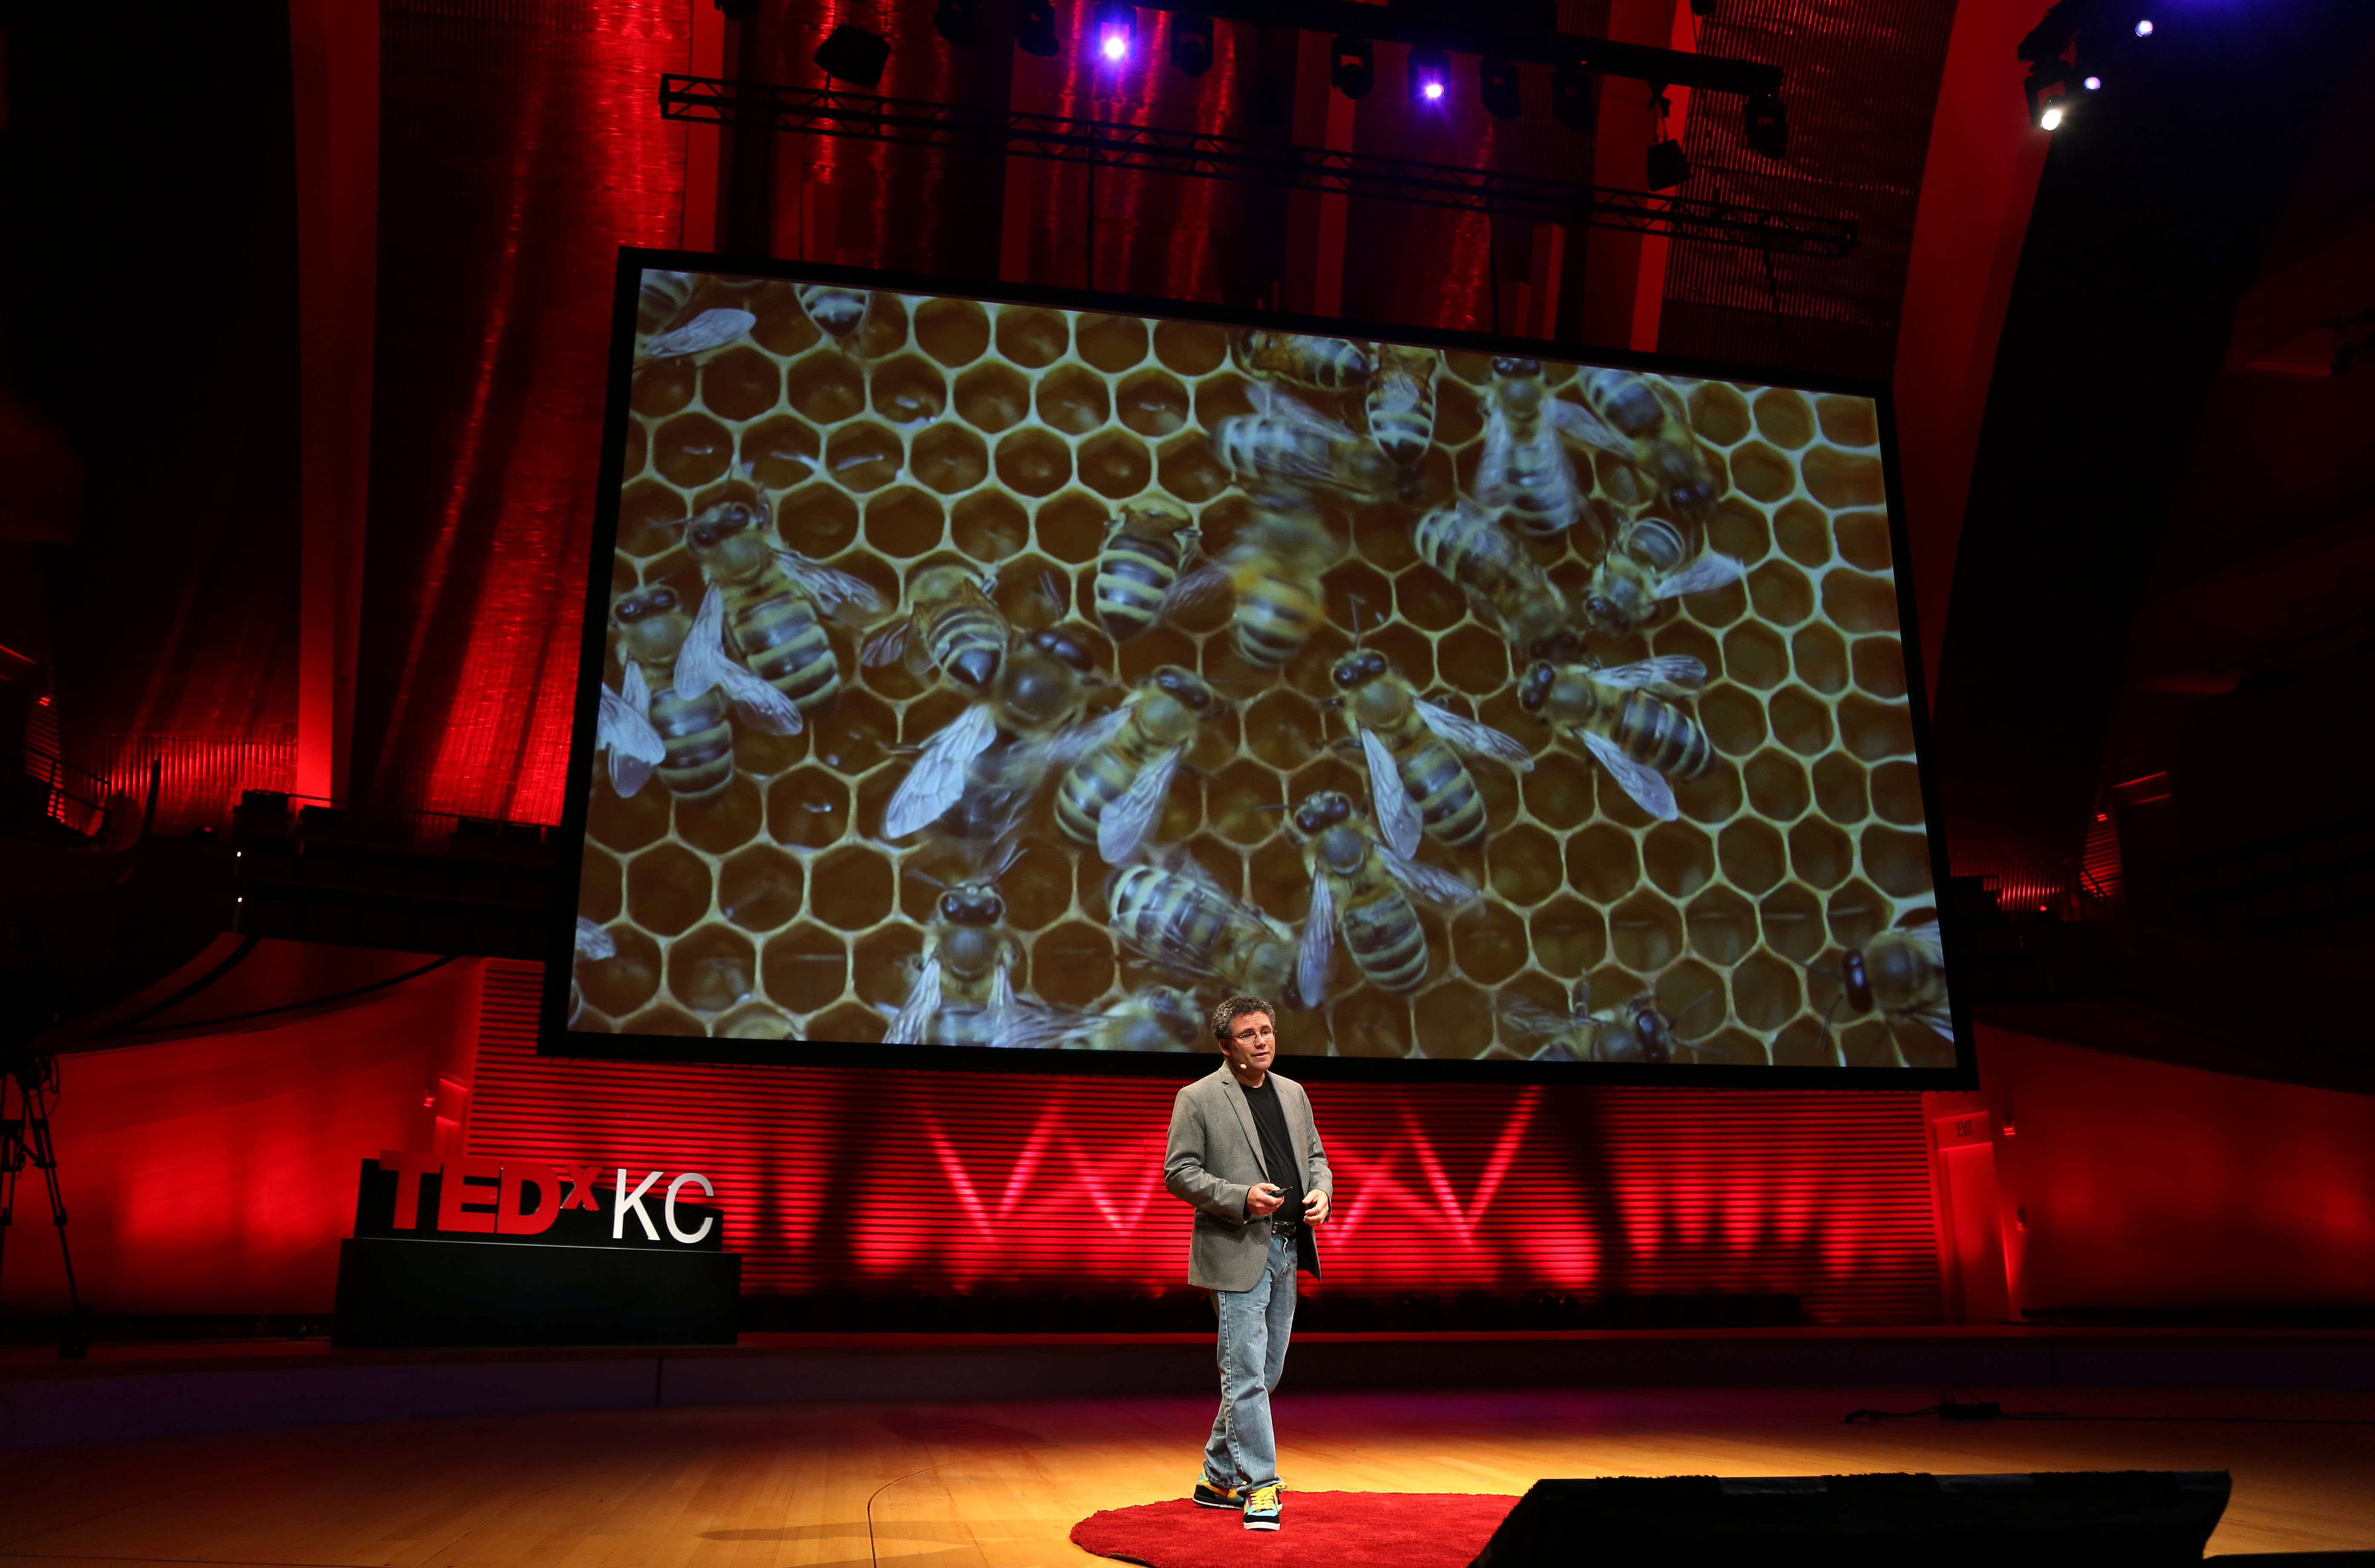 Louis Rosenberg PhD — a prolific inventor, scientist, entrepreneur — developed Swarm AI, a new technology that combines real-time human insights and AI algorithms to produce “hive minds” modeled after